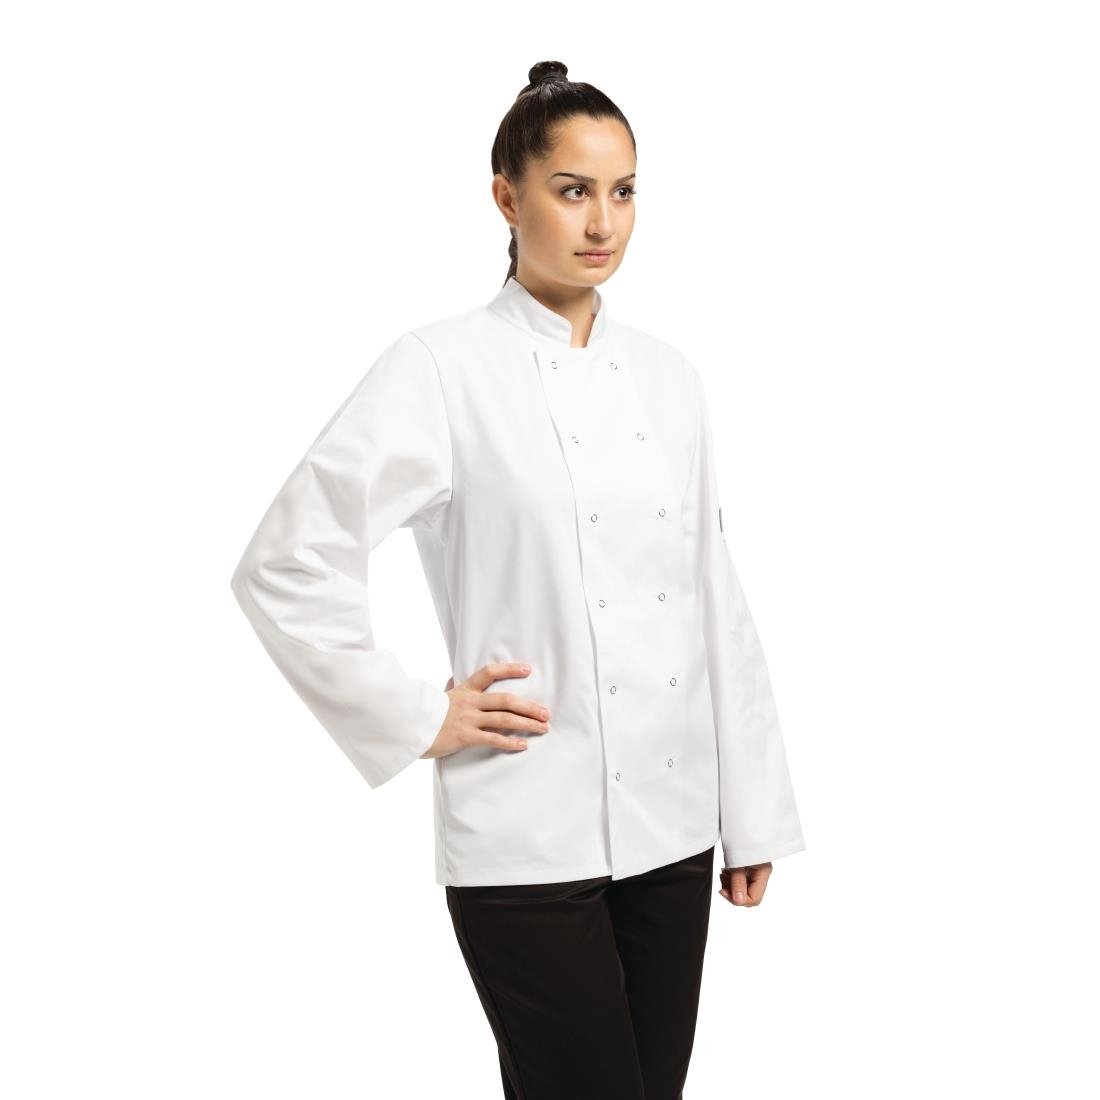 A134-XS Whites Vegas Unisex Chefs Jacket Long Sleeve White XS JD Catering Equipment Solutions Ltd